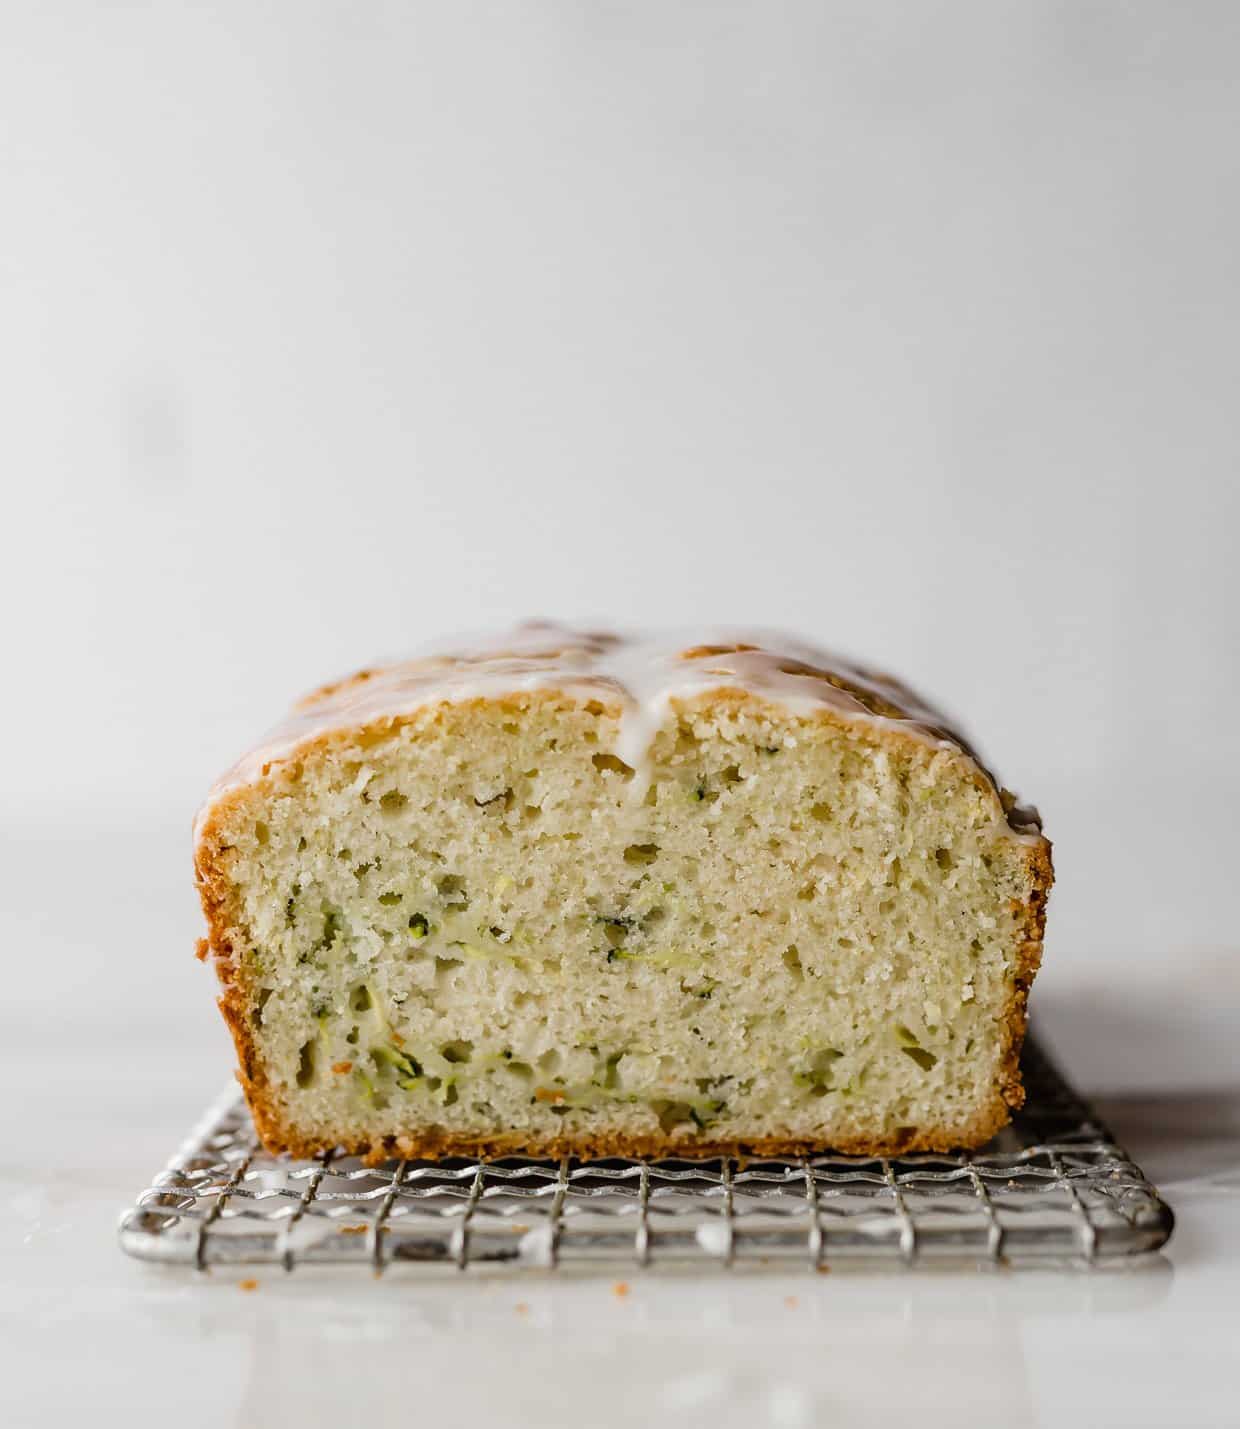 A sliced Lemon Zucchini loaf on a wire rack against a white background.